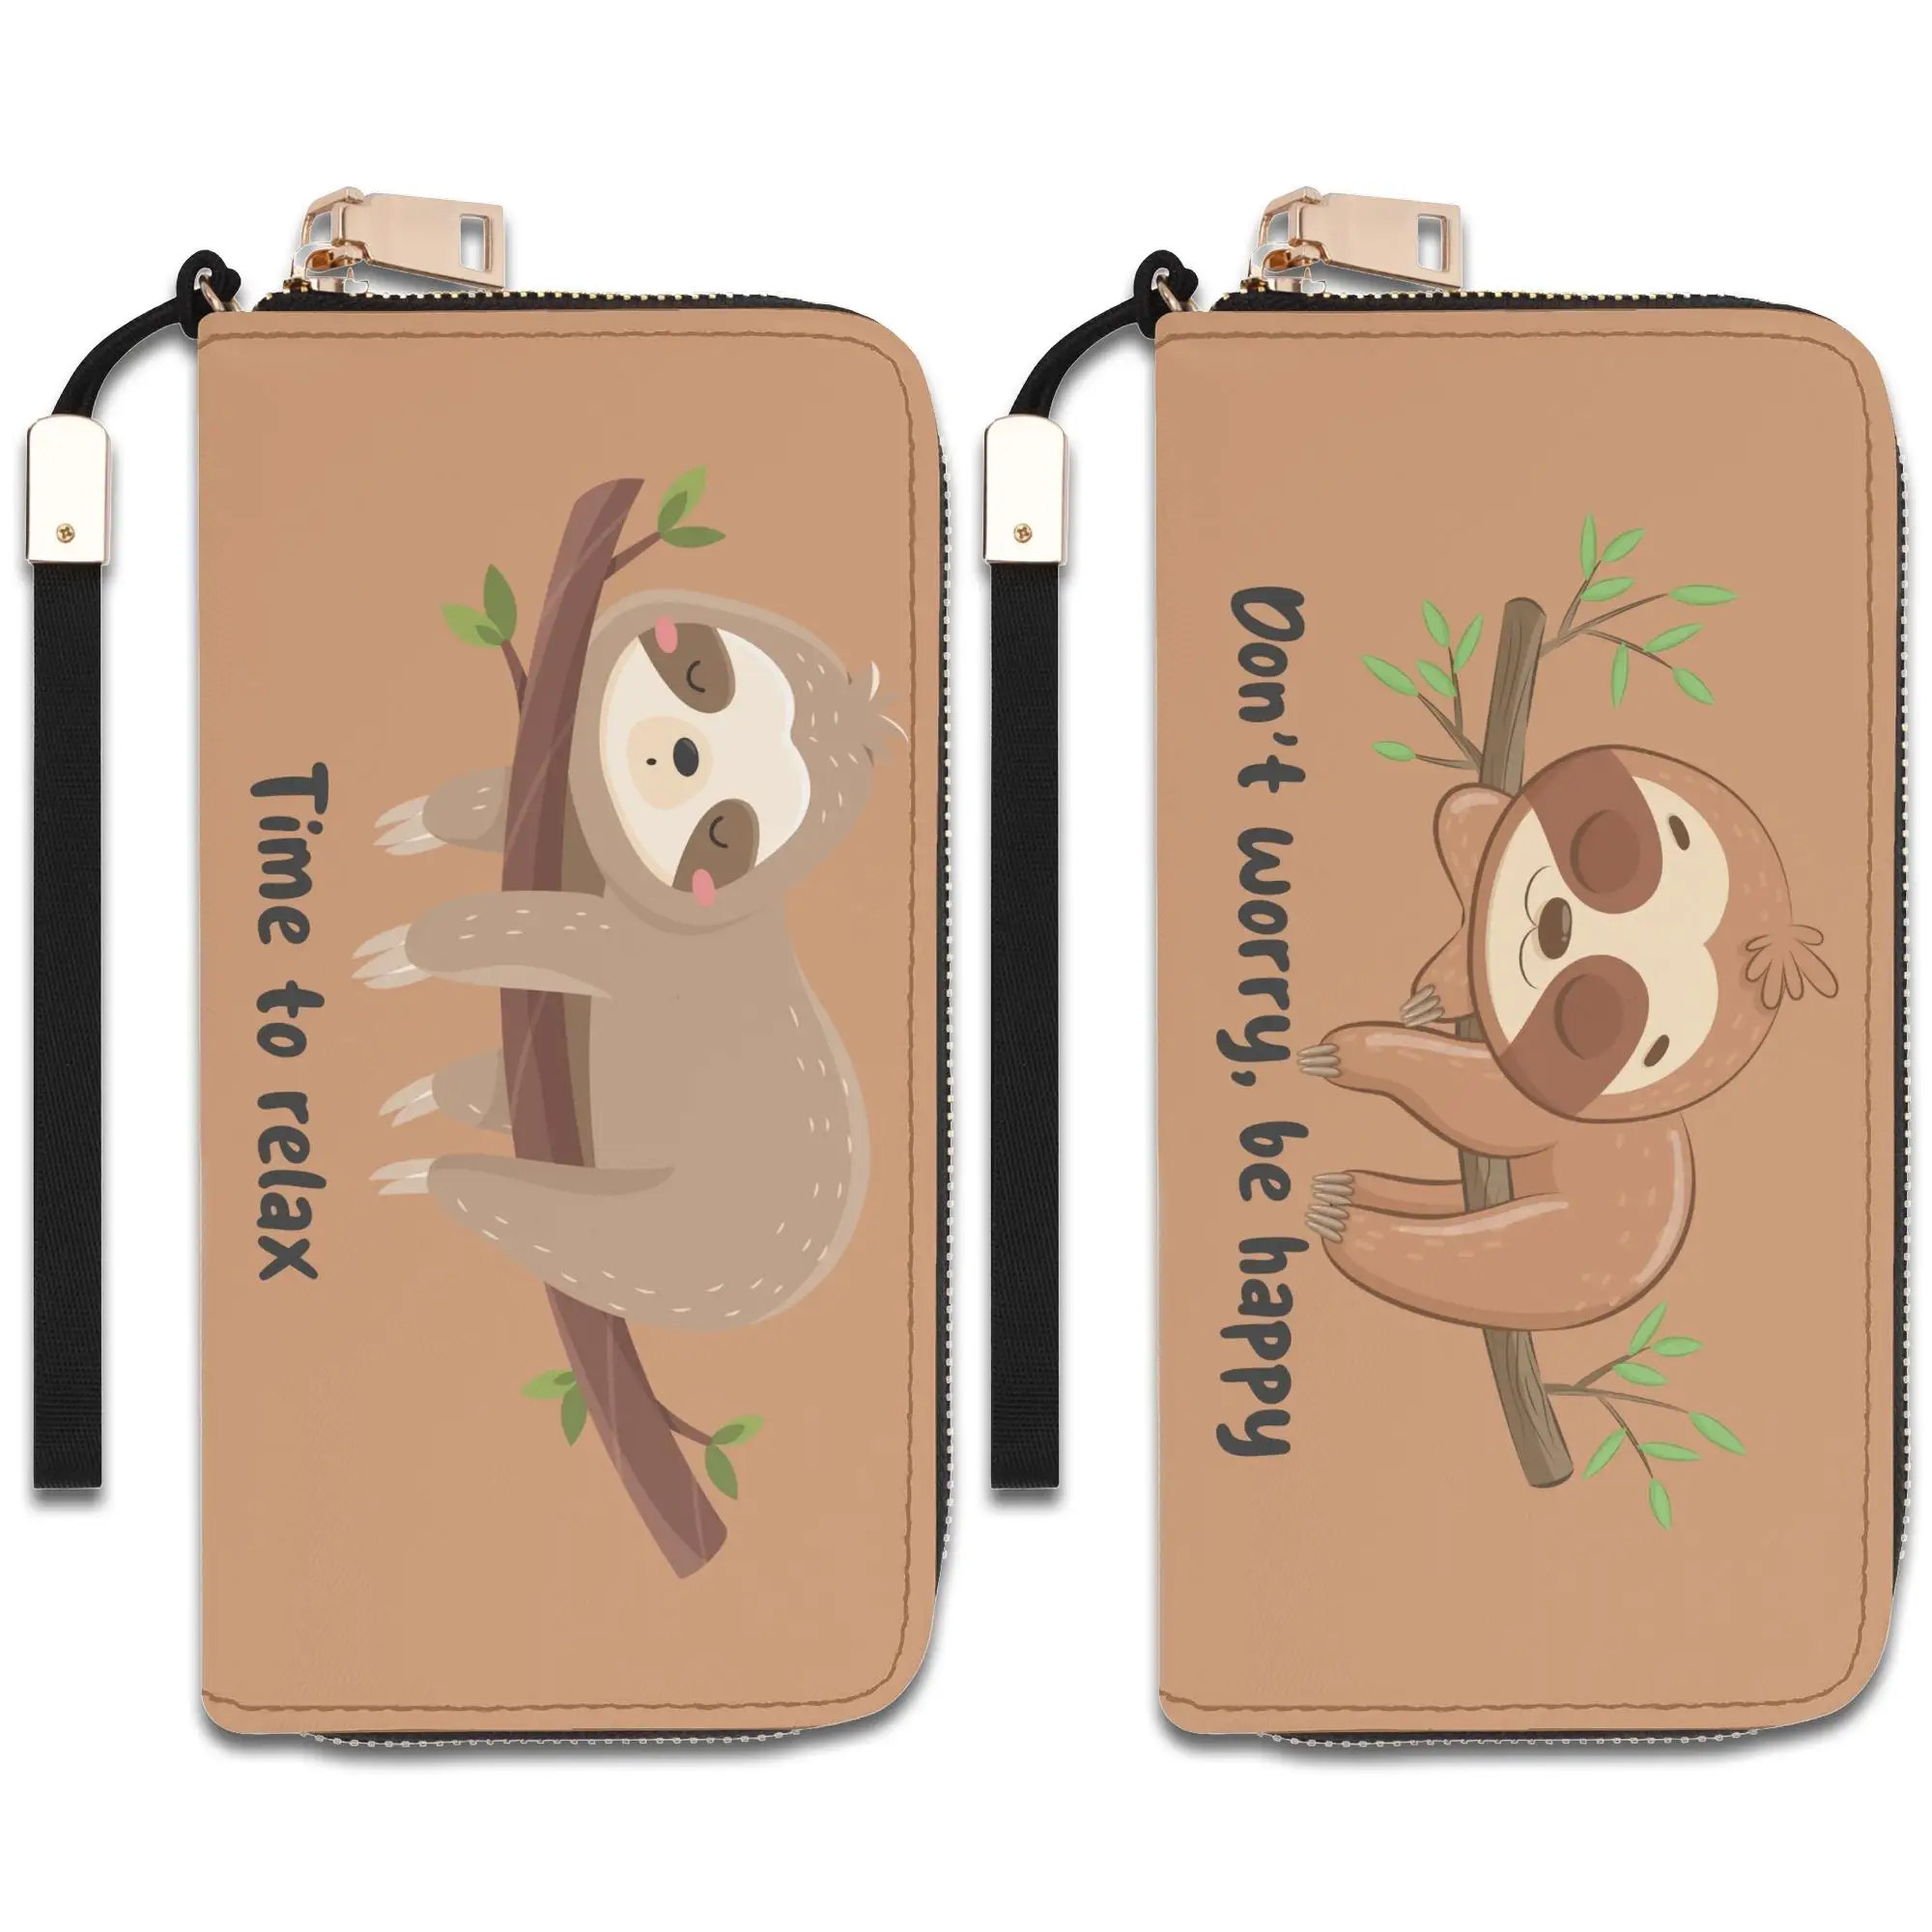 

2023 Animal Cute Sloth Luxury Vegan Leather Long Women Wallets Big Size Card Holder Phone Clutch For Everyday Use